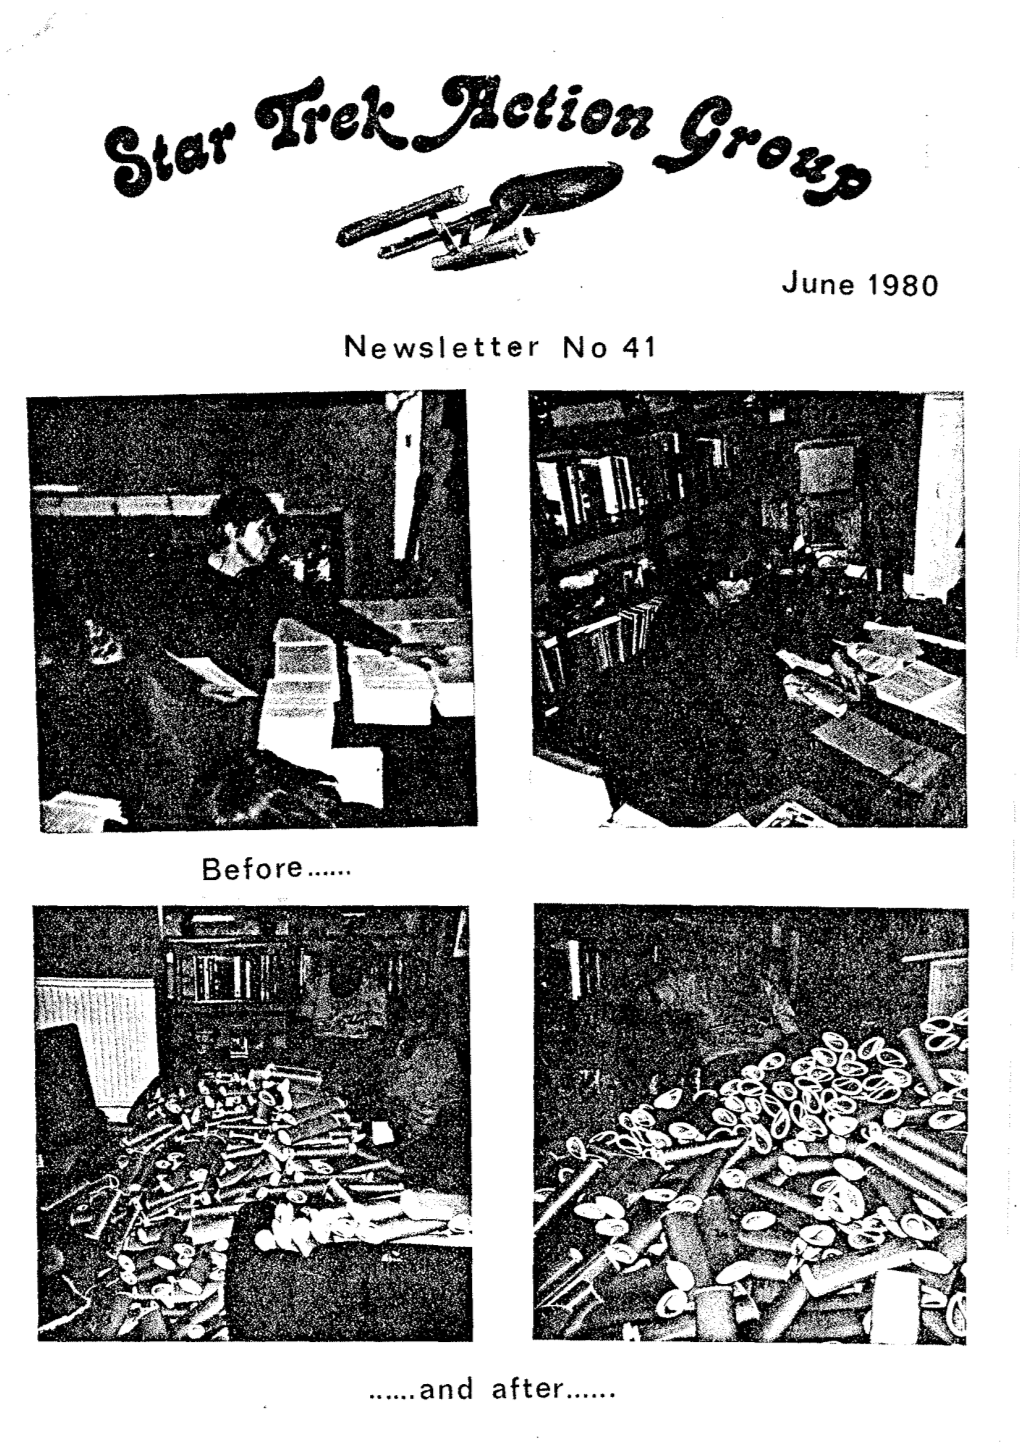 June 1980 Newsletter No 41 Before ...And After